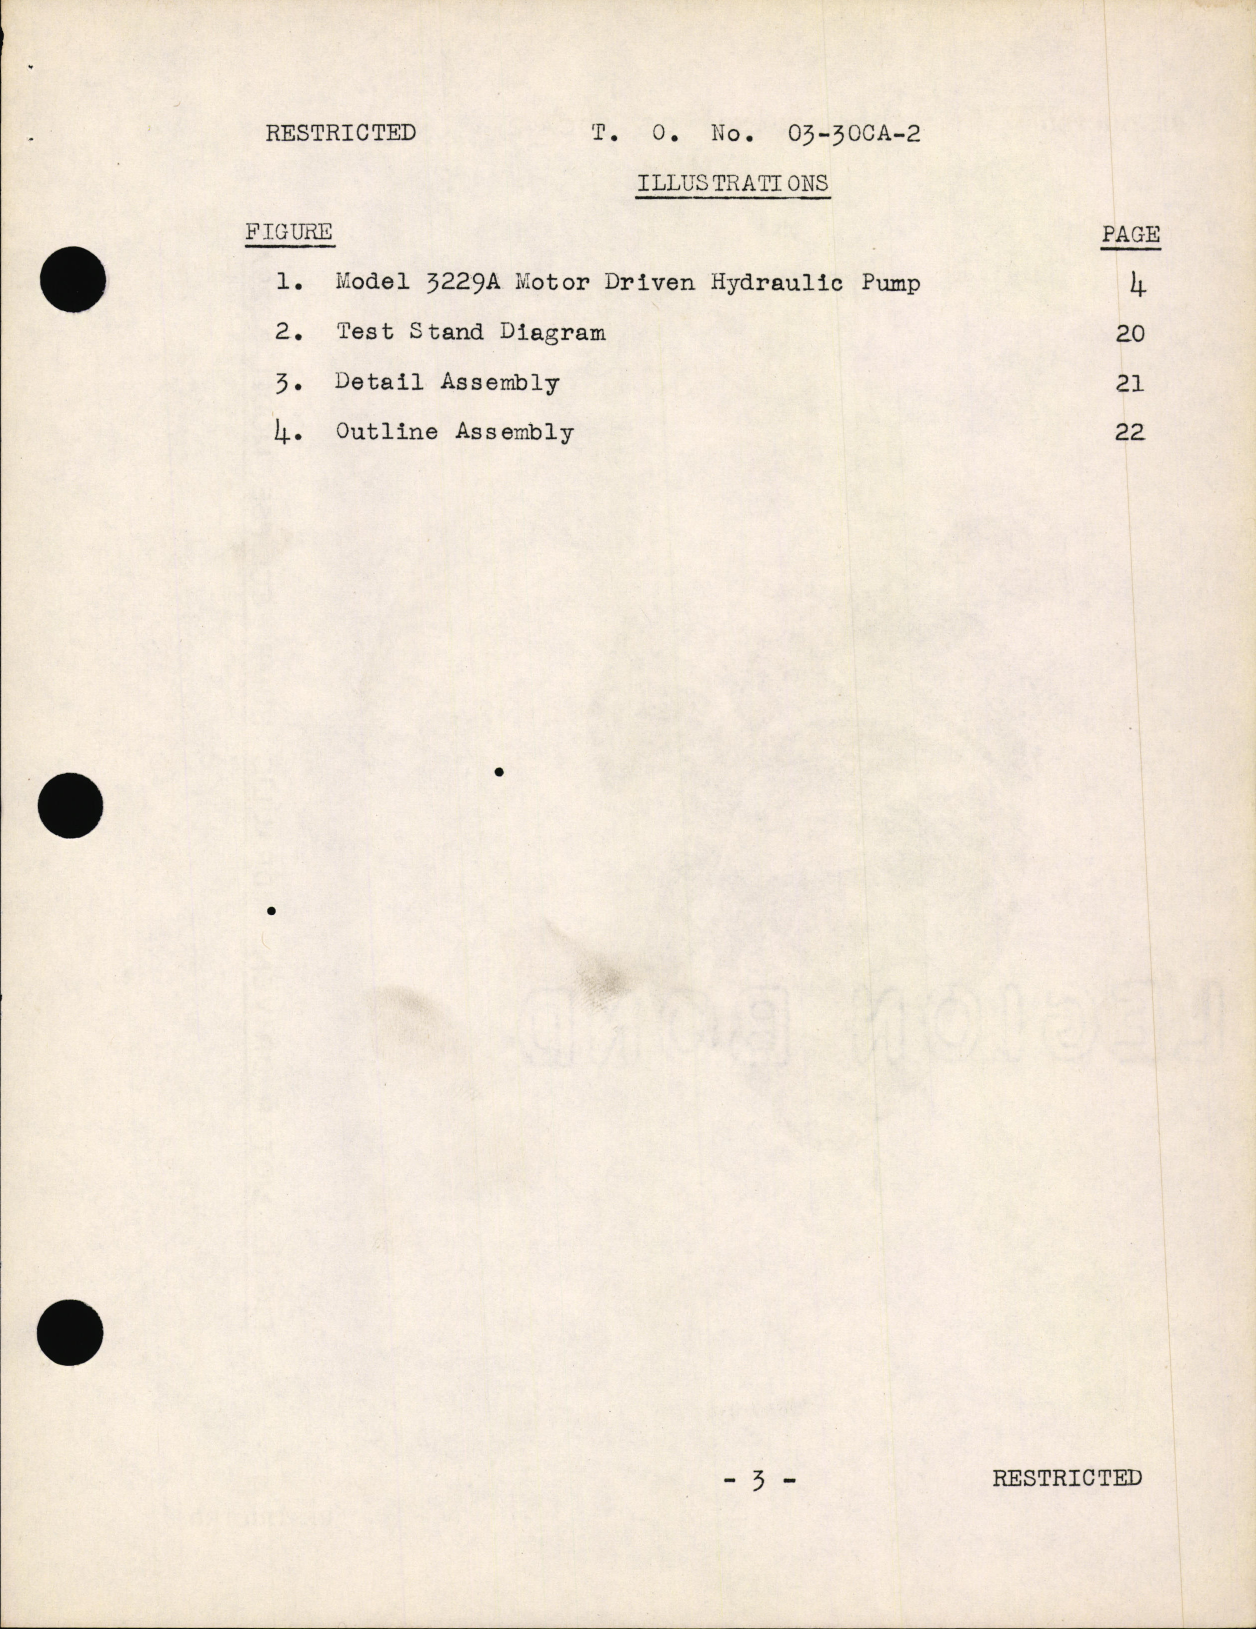 Sample page 5 from AirCorps Library document: Preliminary Handbook of Instructions for Motor-Driven Hydraulic Pumps Eclipse Model 3229A